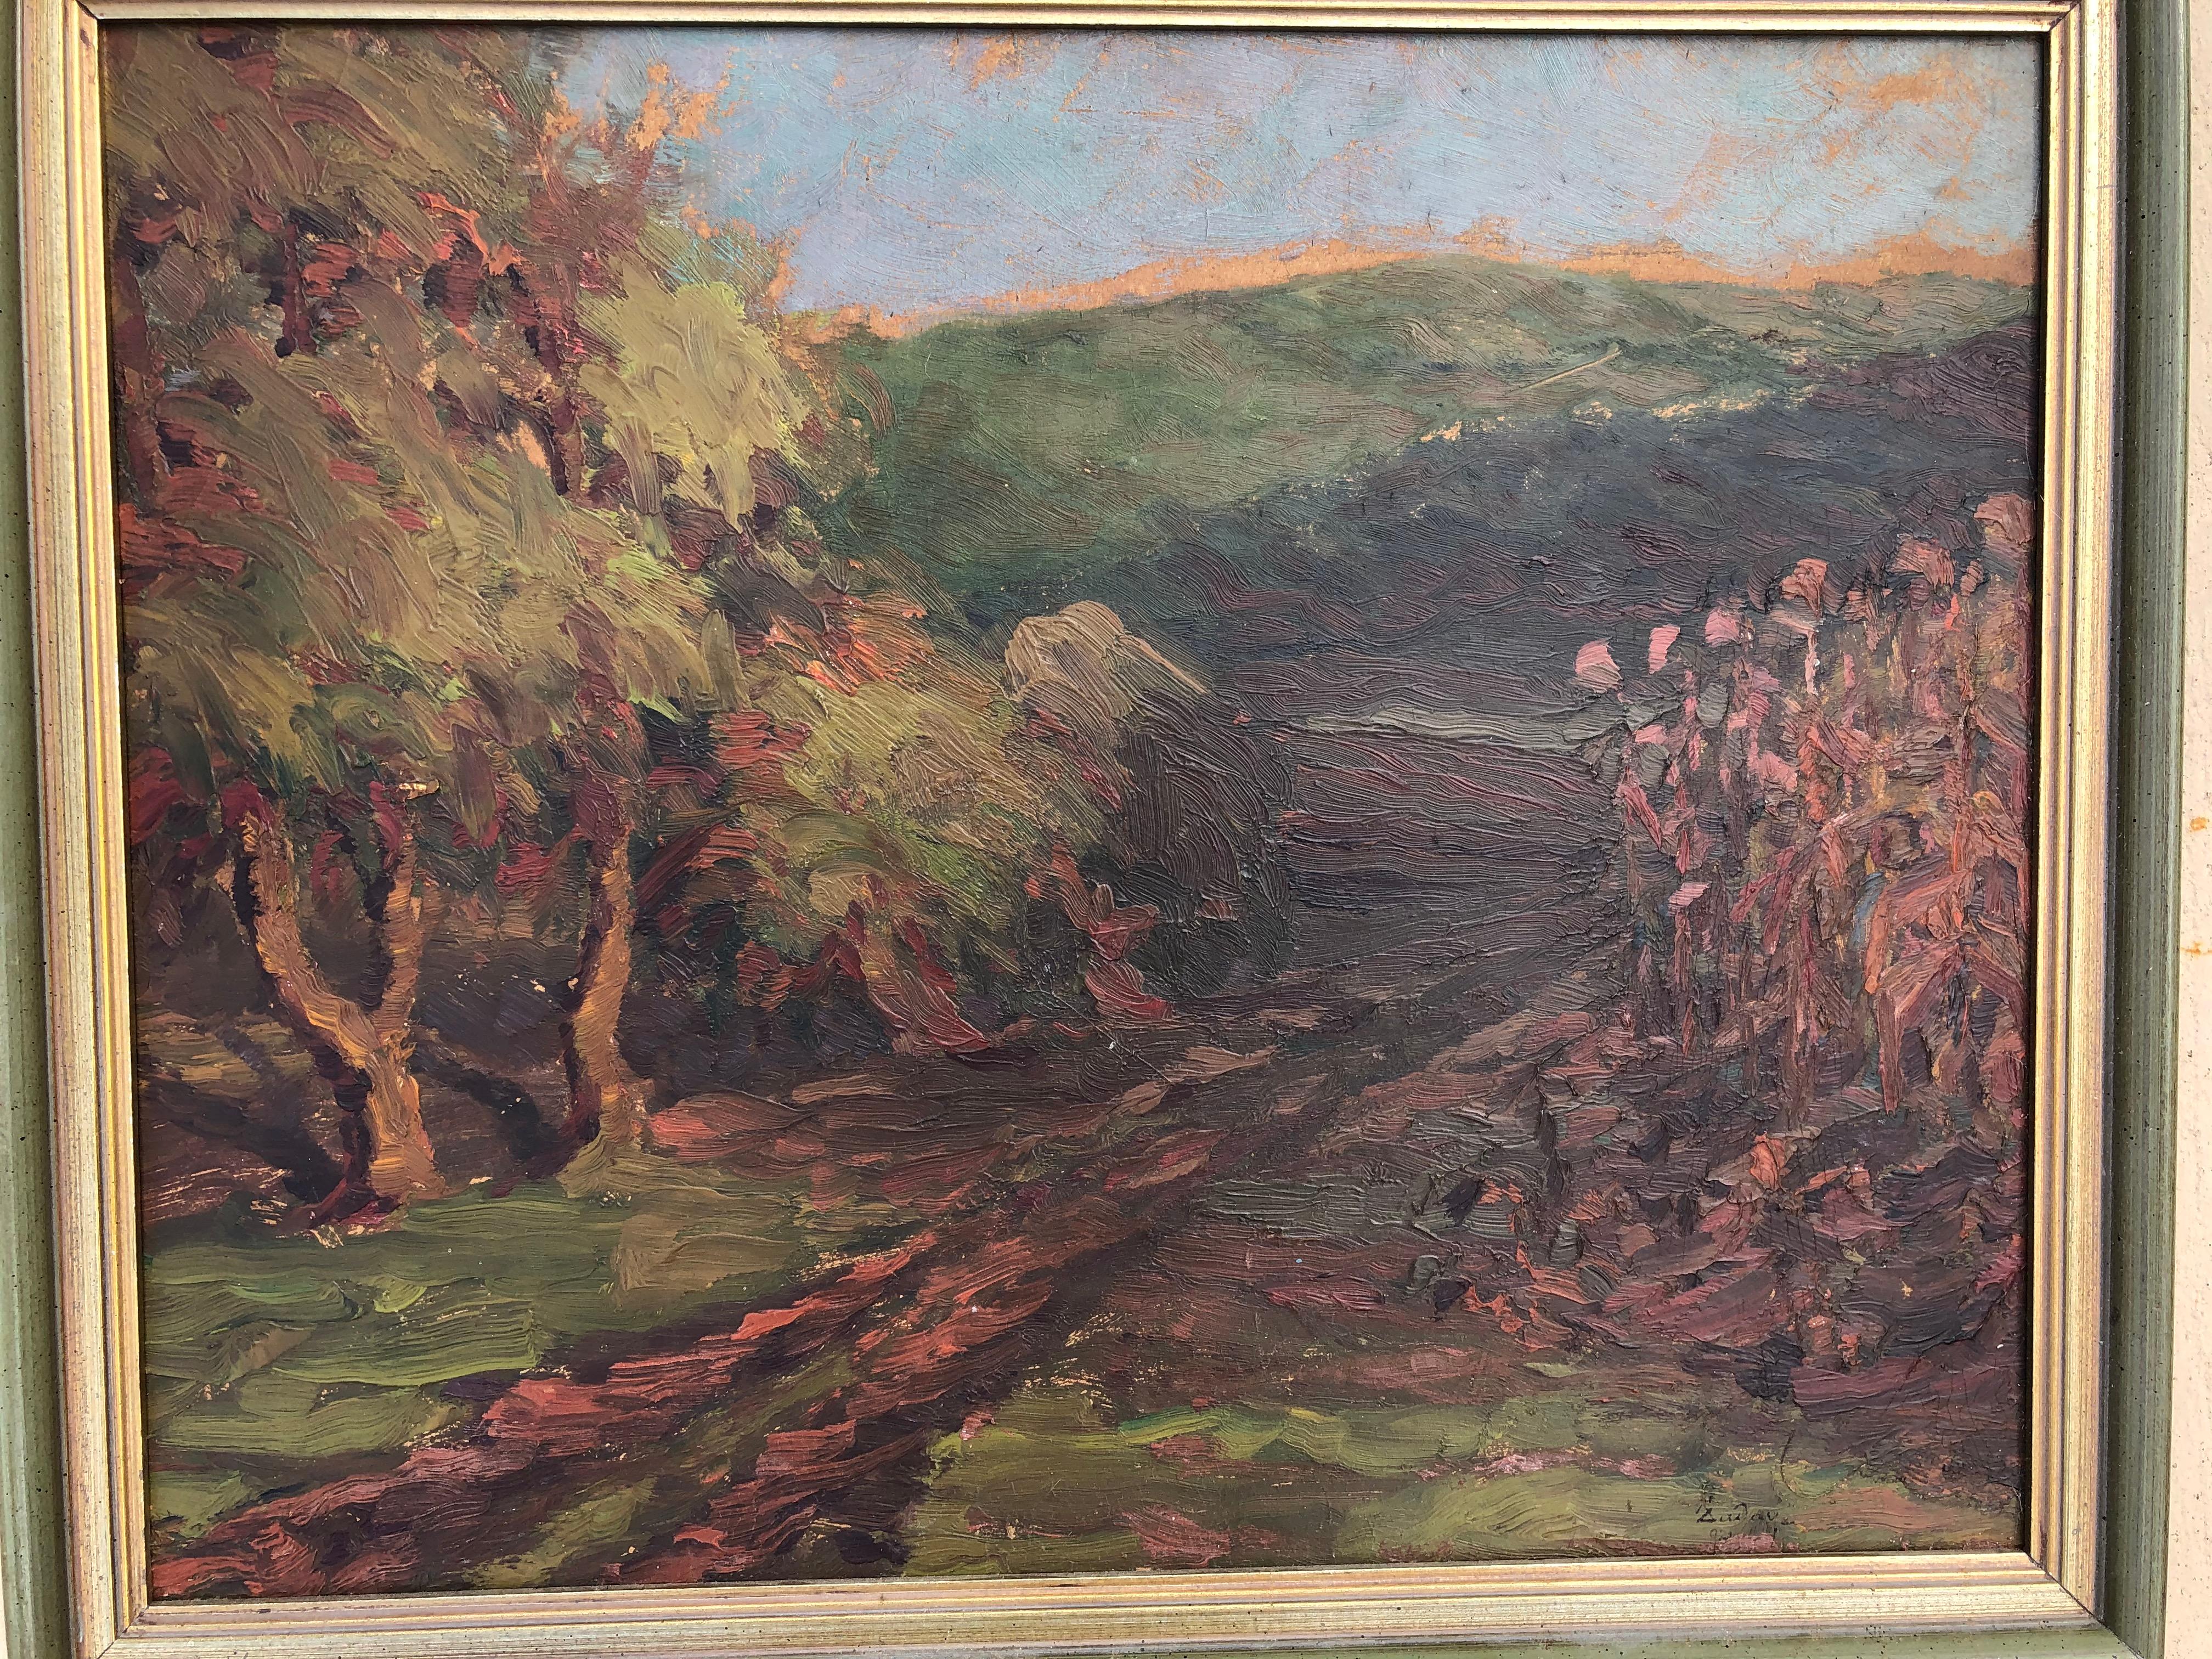 Unknown Landscape Painting - Mystery Signed Impressionistic Landscape